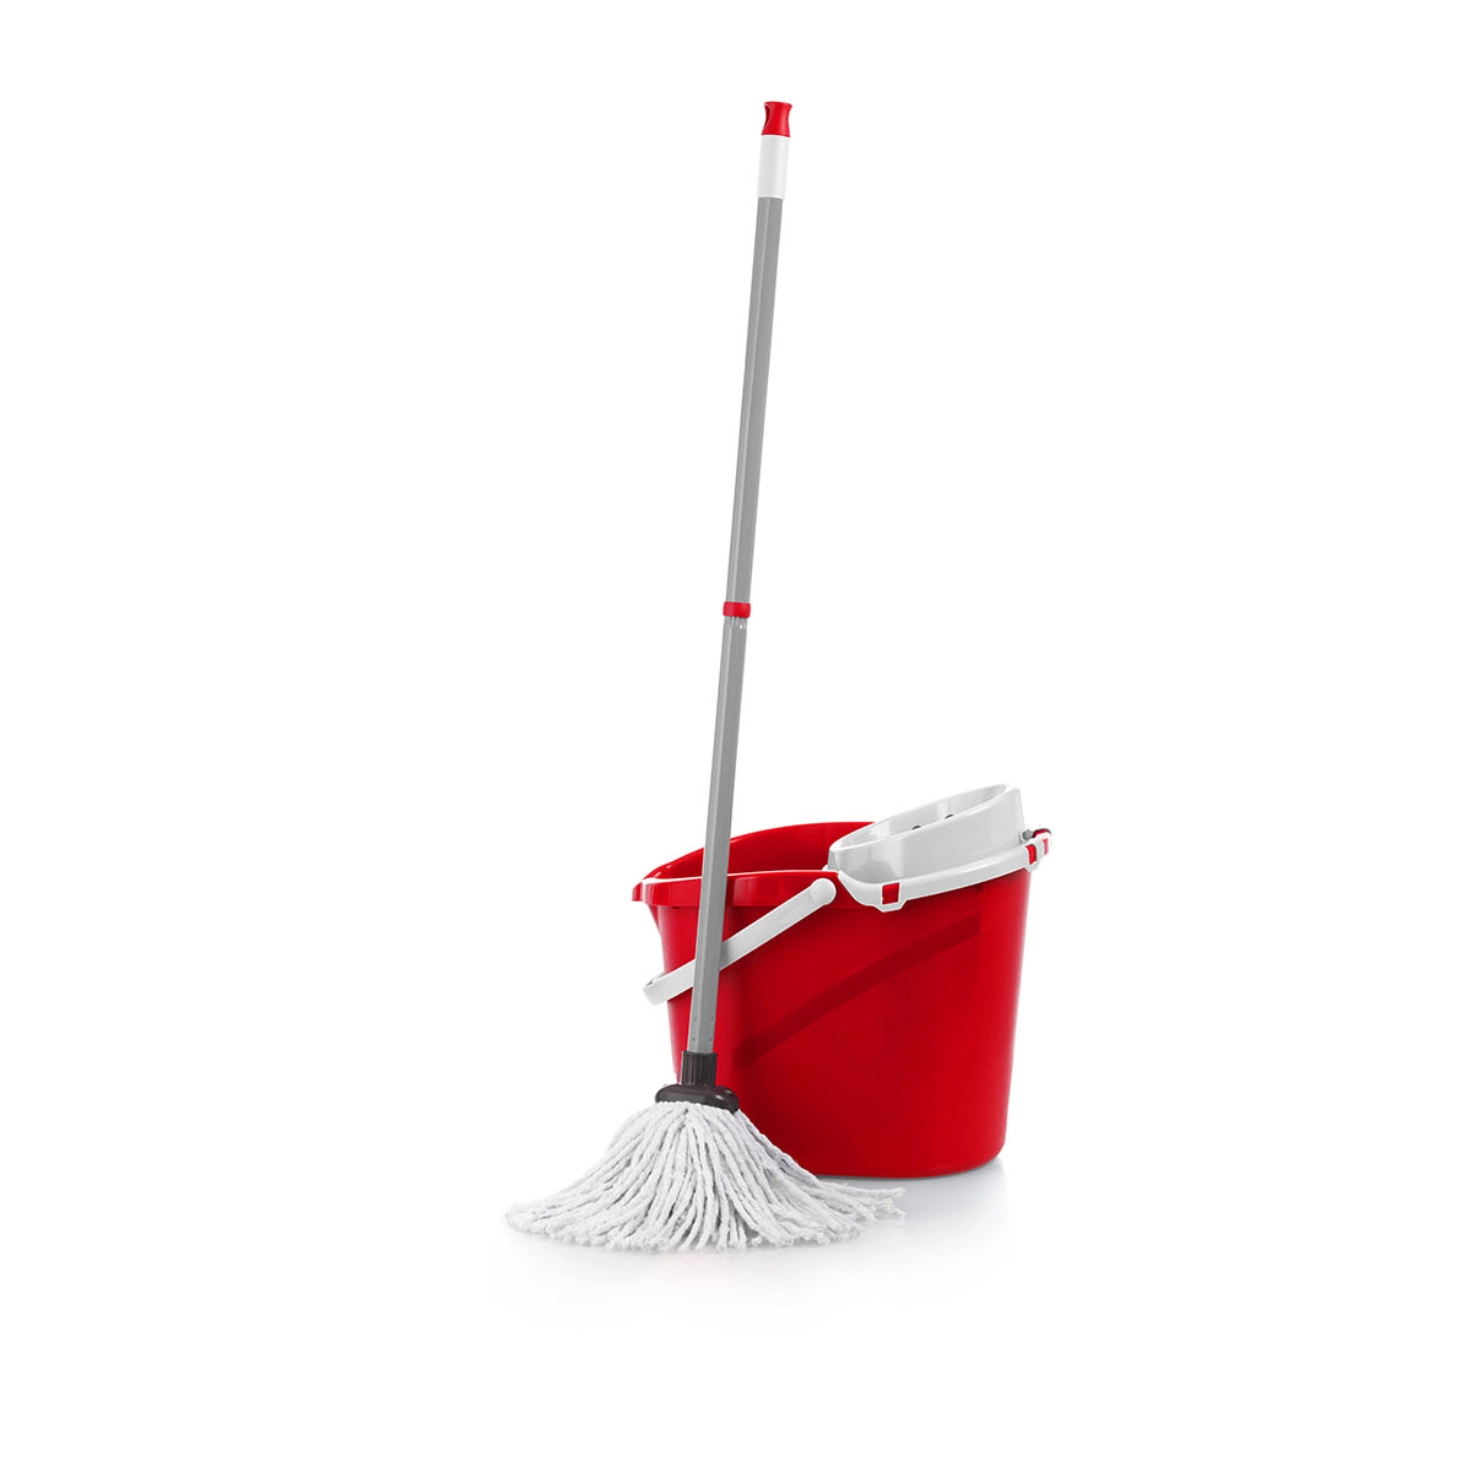 Cleaning bucket with mop against a neutral background